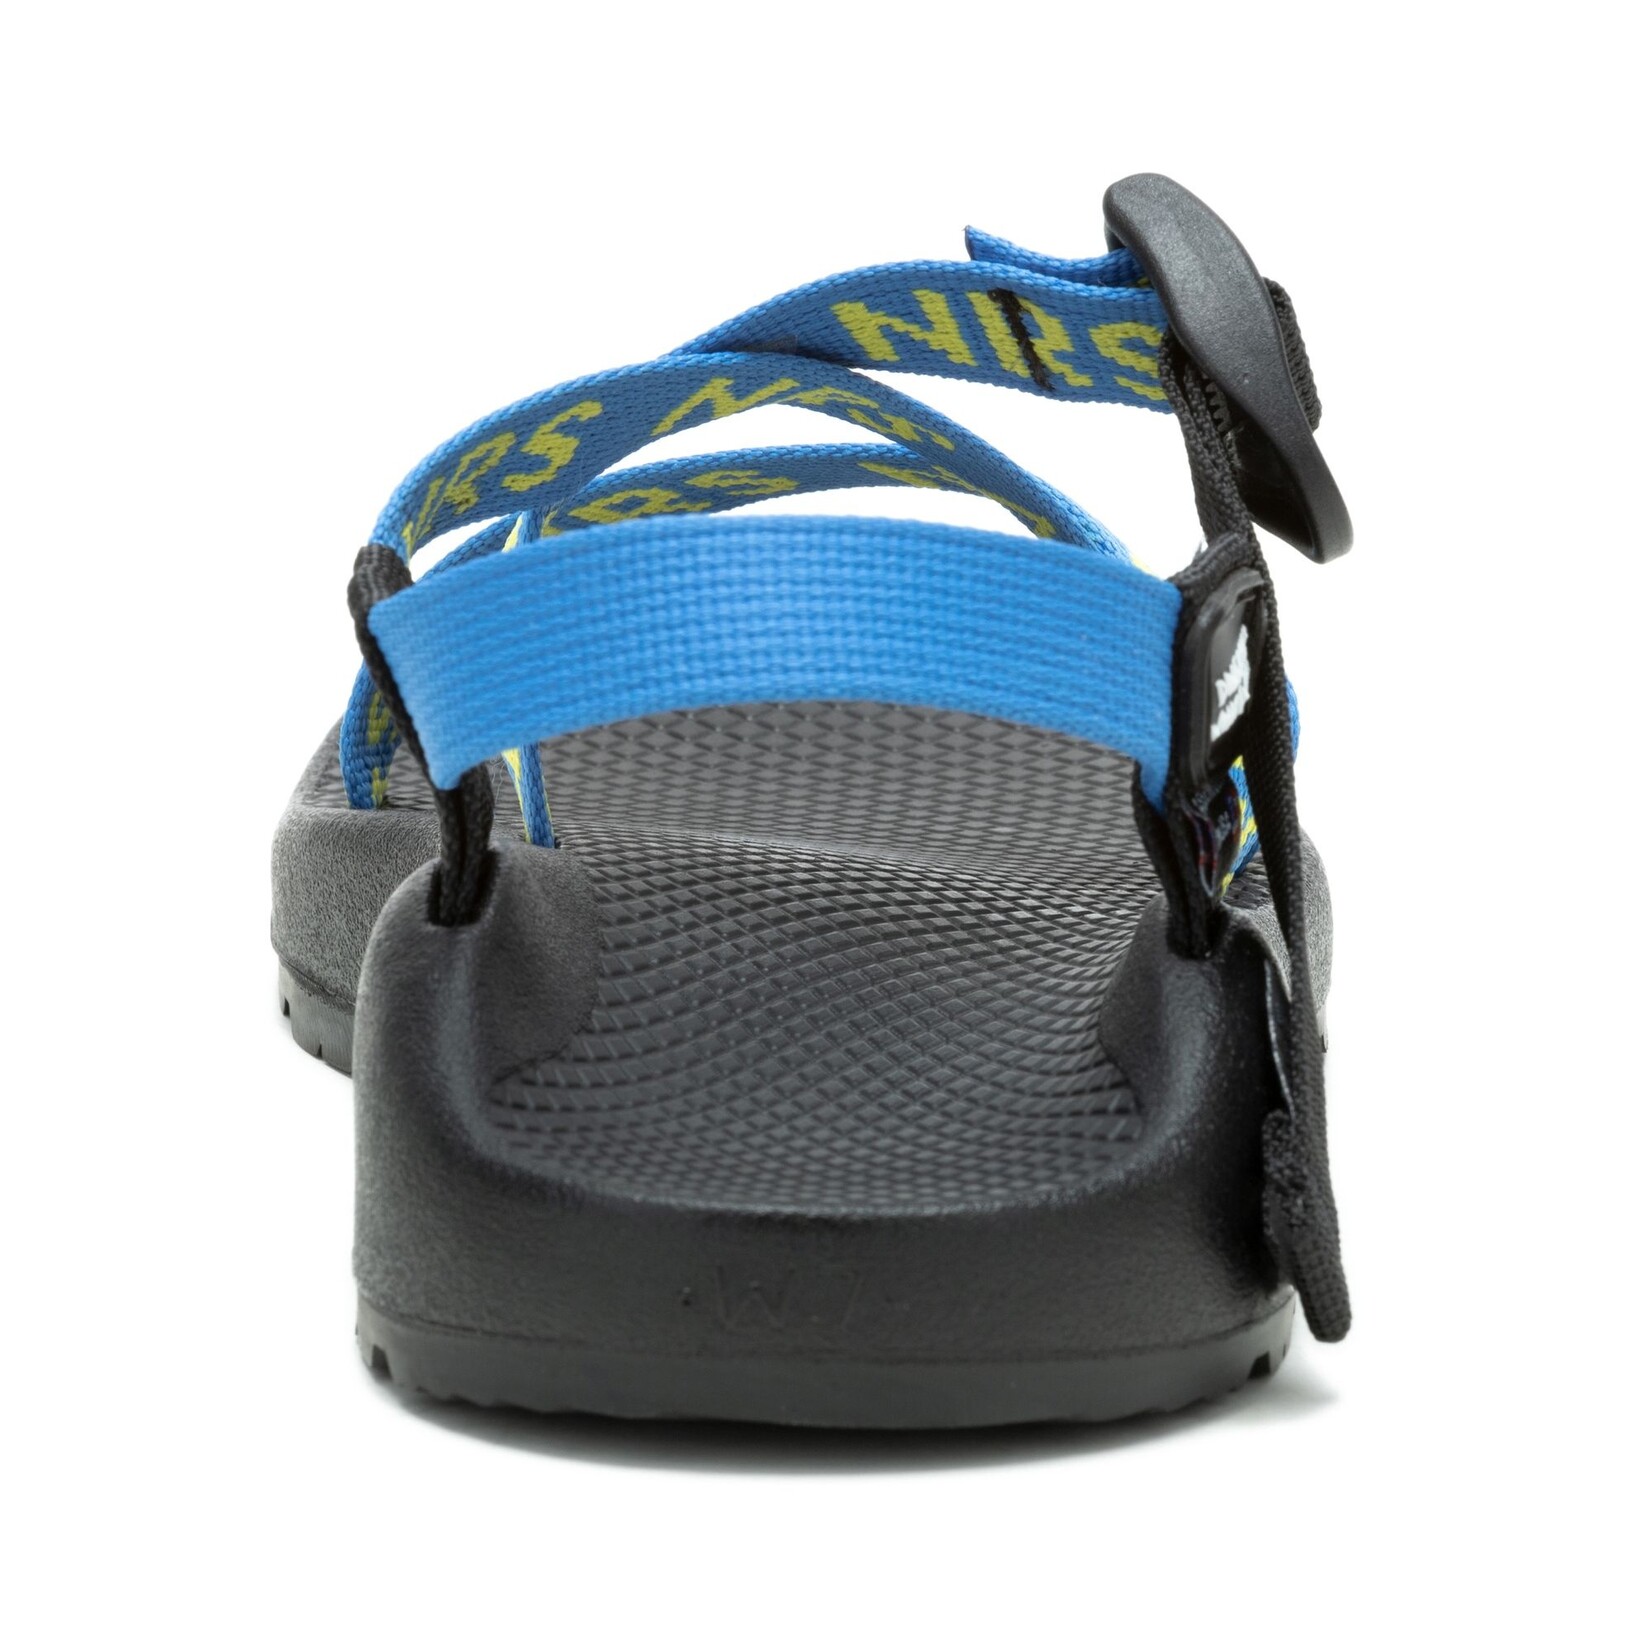 Chaco Chaco Women's Z/1 Classic with NRS Strap Webbing - Closeout